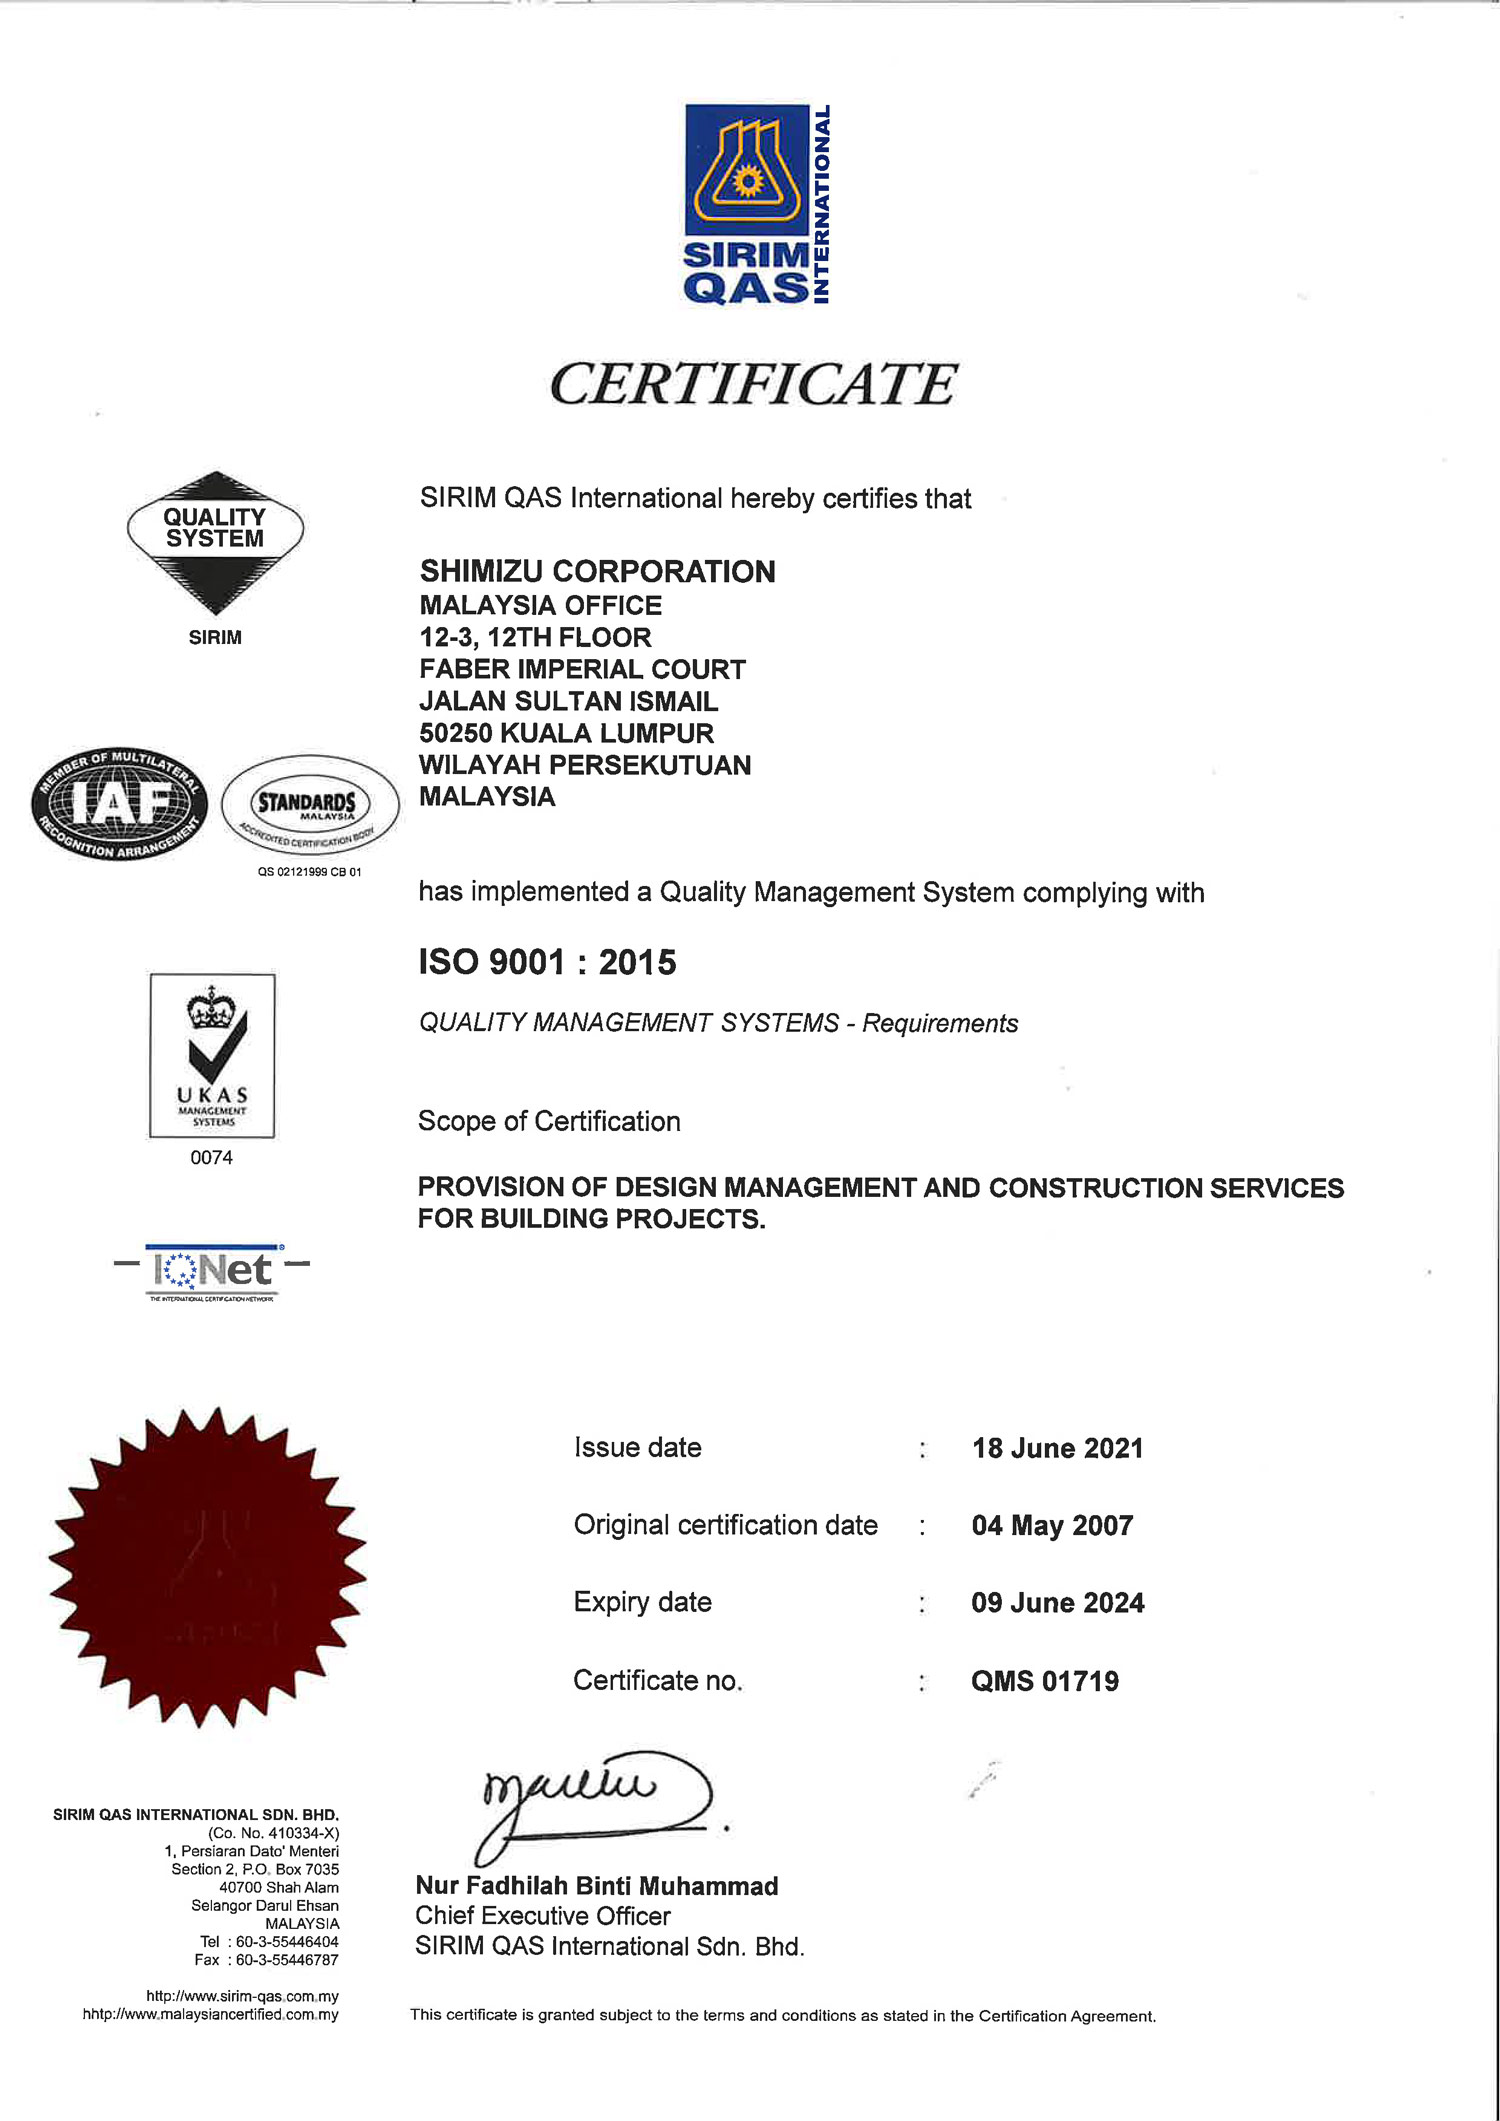 Quality Management Systems - ISO 9001 2015 (Sirim)